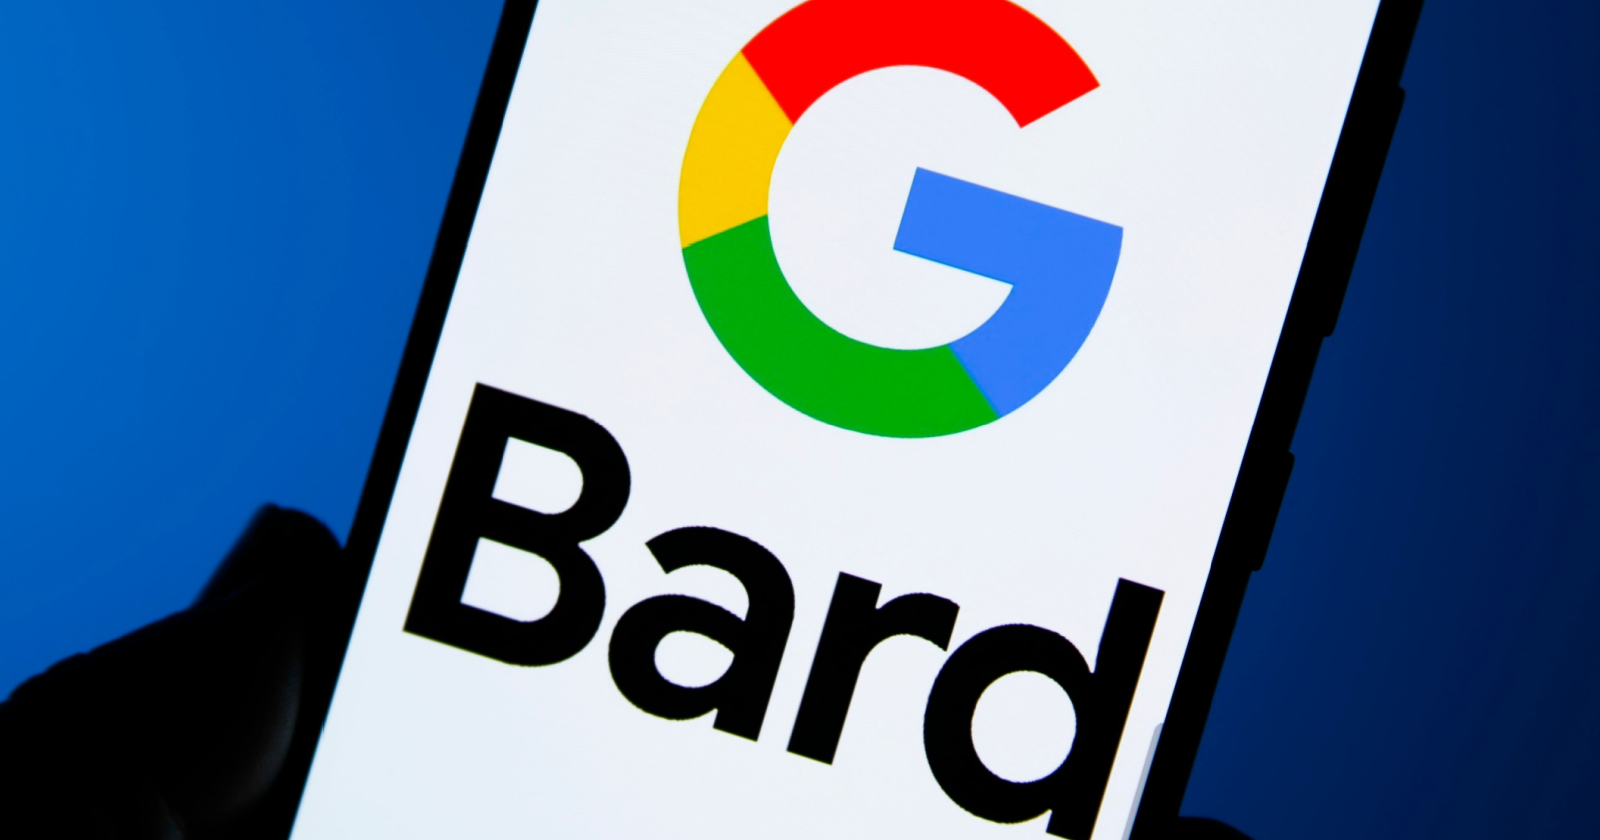 Google Bard’s Latest Update Boosts Creativity With More Drafts